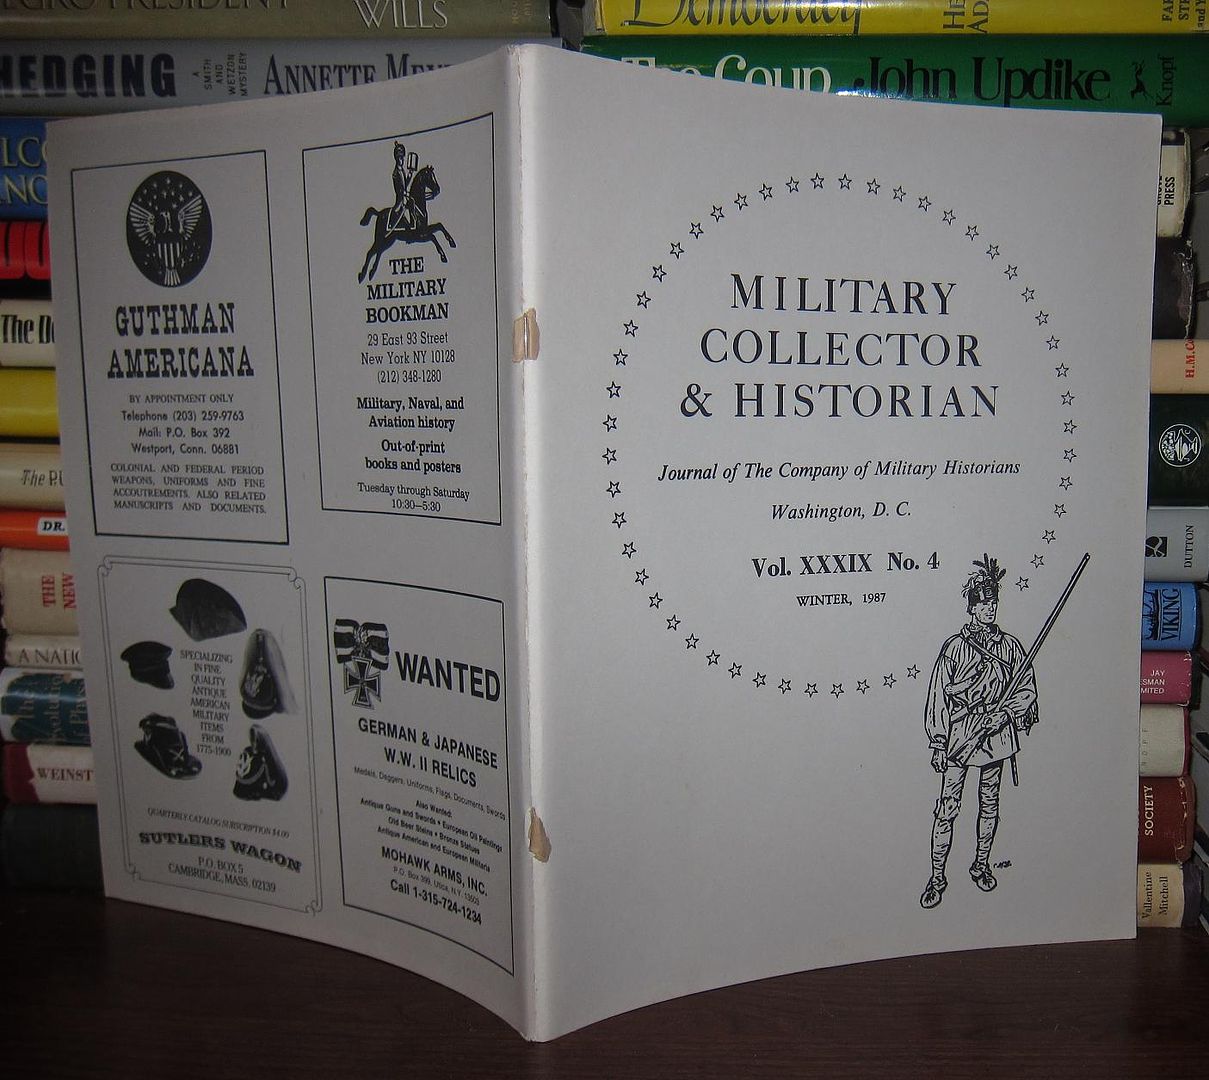 BROWNE, HOWARD - Military Collector & Historian Journal of the Company of Military Historians, Vol. XXXIX, No. 4